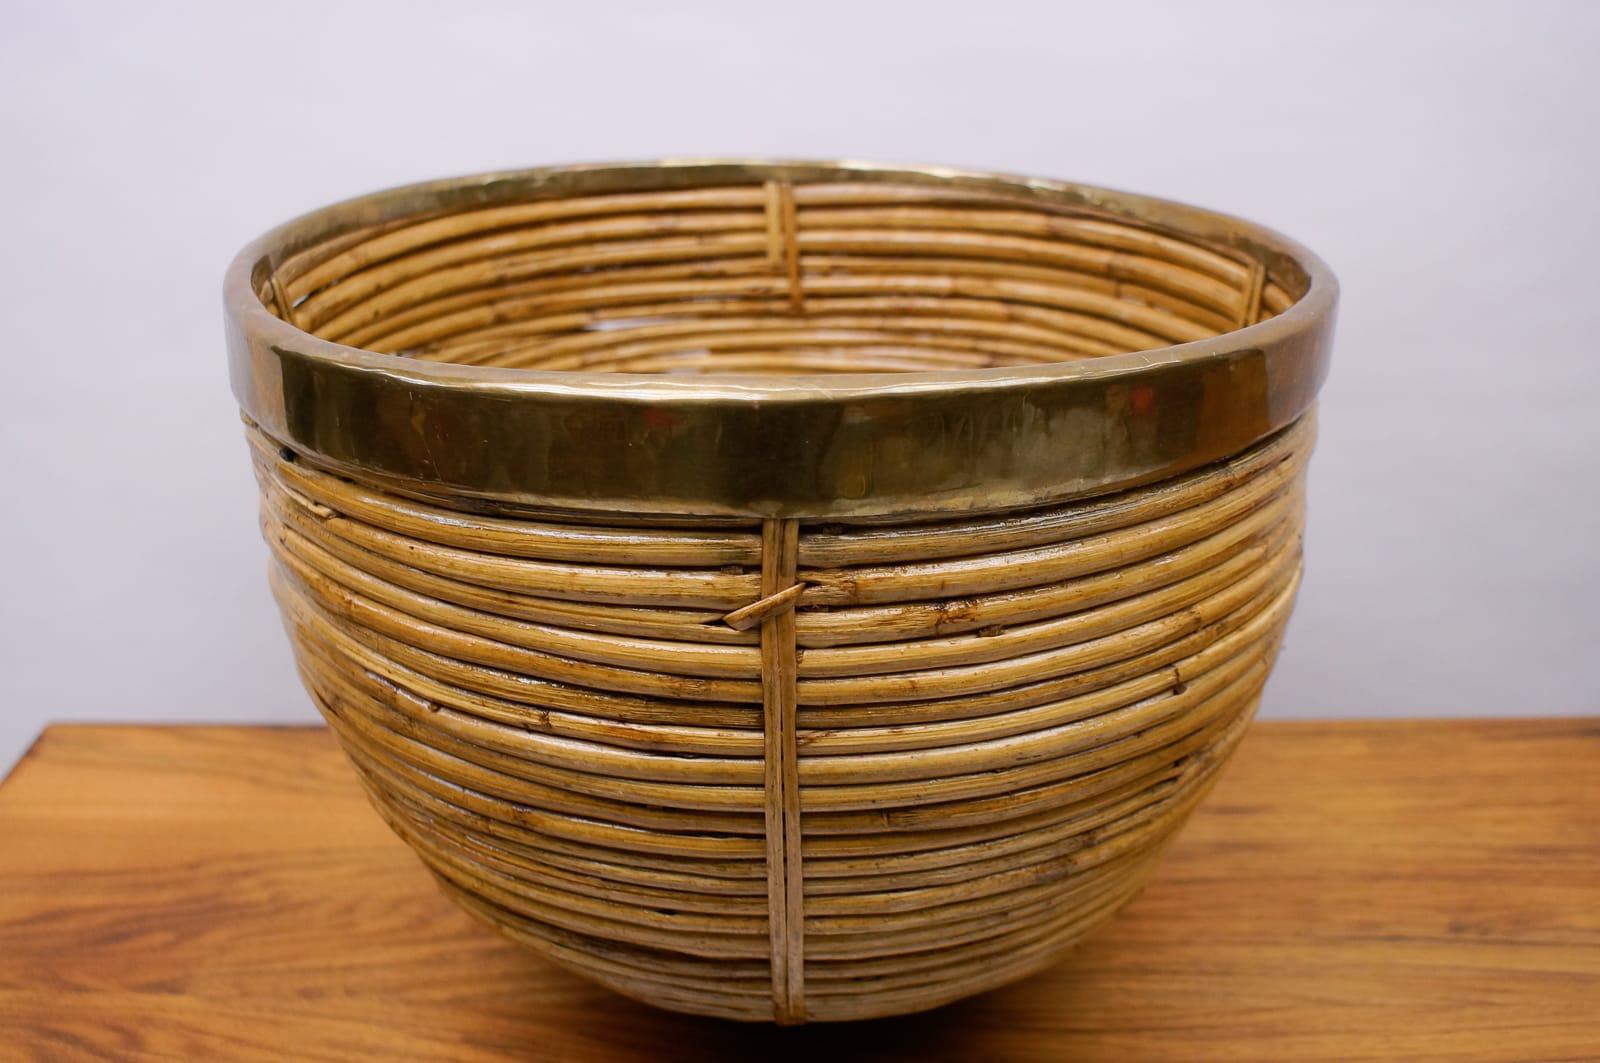 Austrian Large Rattan and Brass Midcentury Handcrafted Bowl, Austria, 1950s For Sale